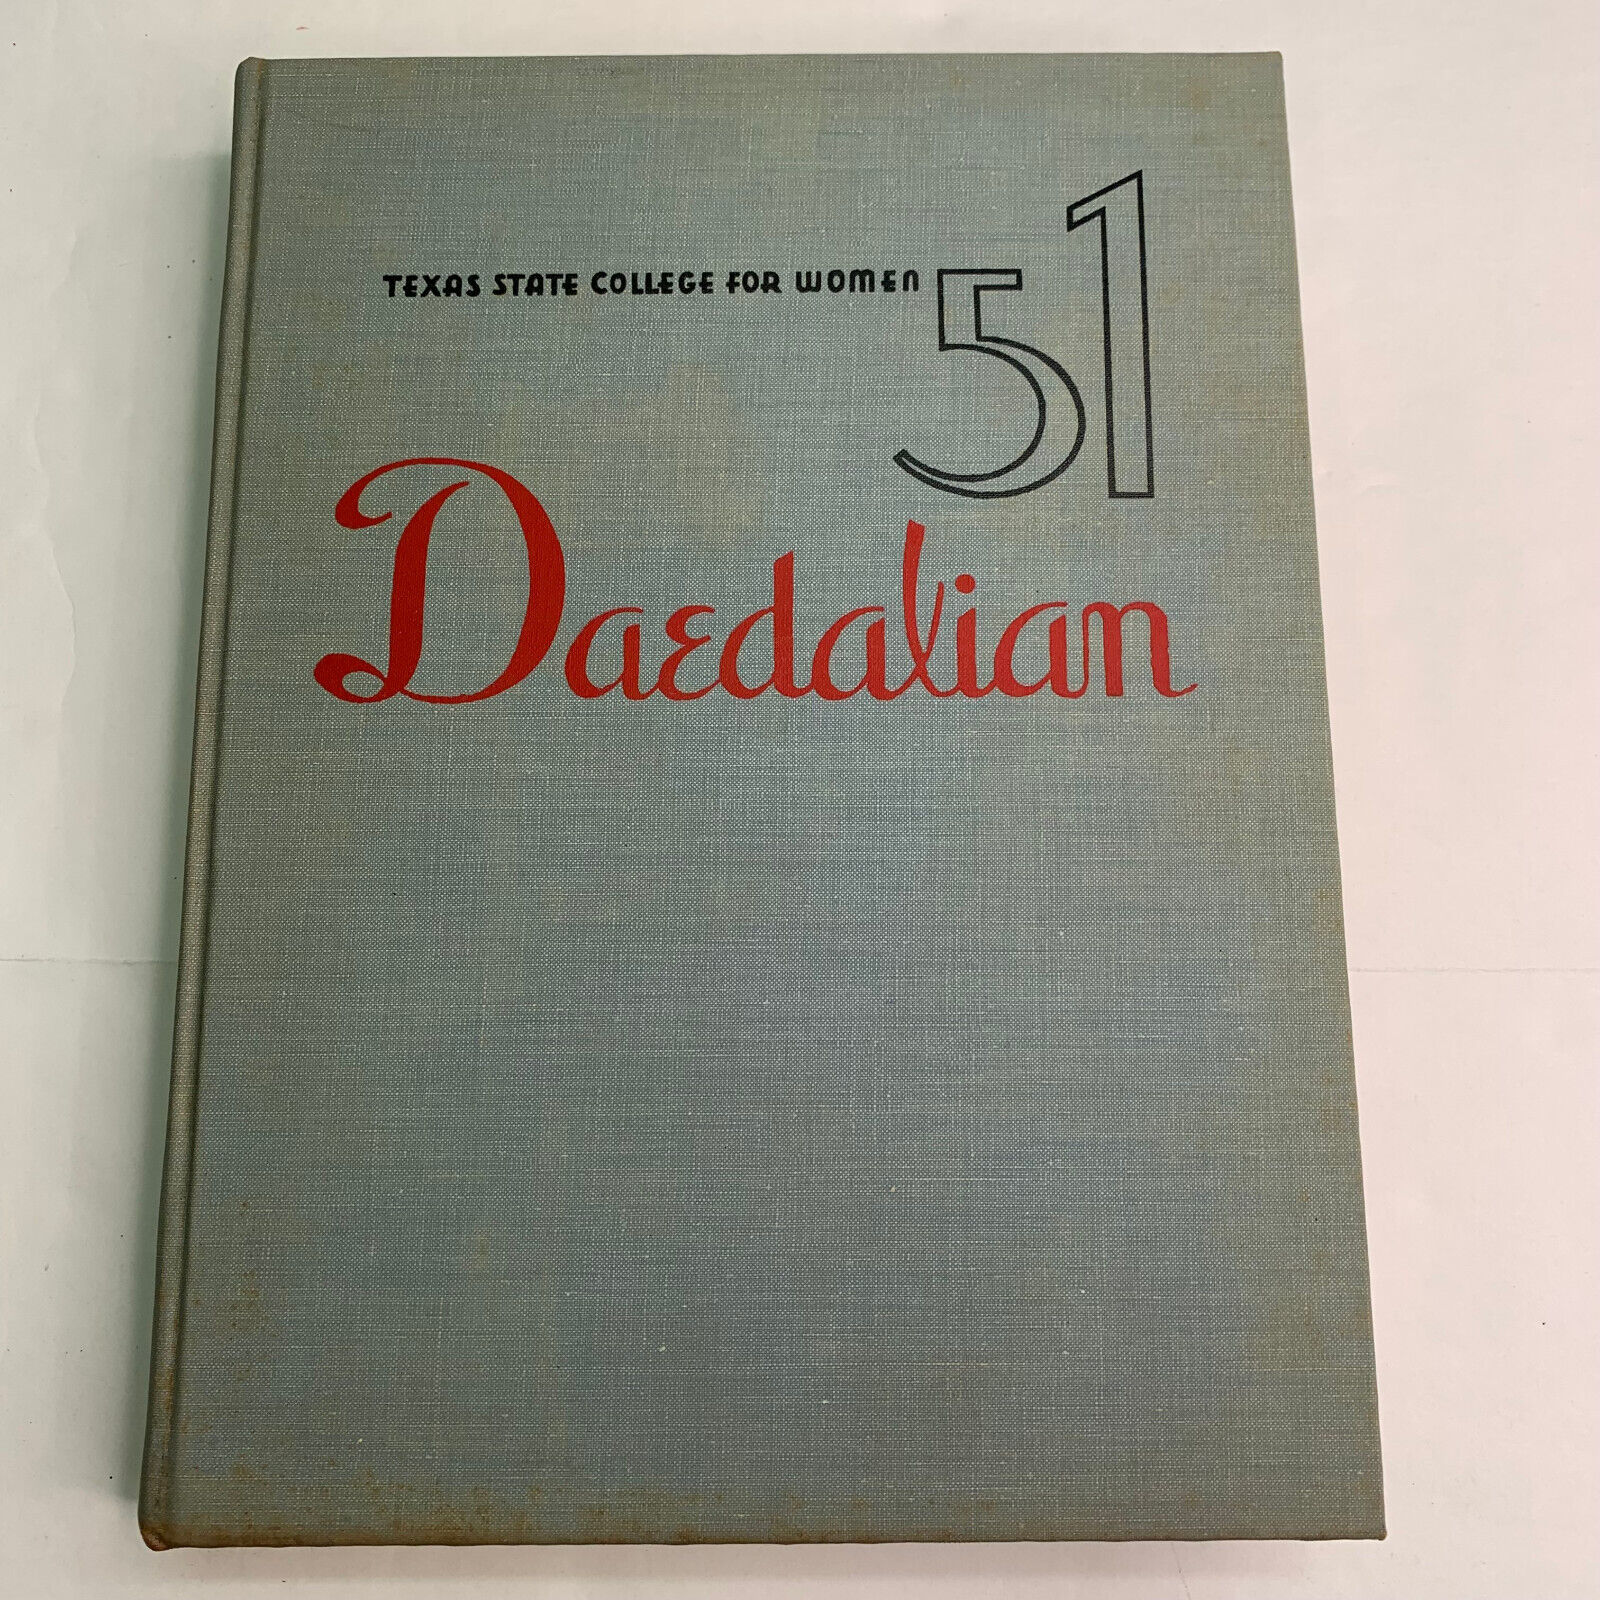 Daedalian 1951 Texas State College For Women TSCW Yearbook Classes Leaders Clubs